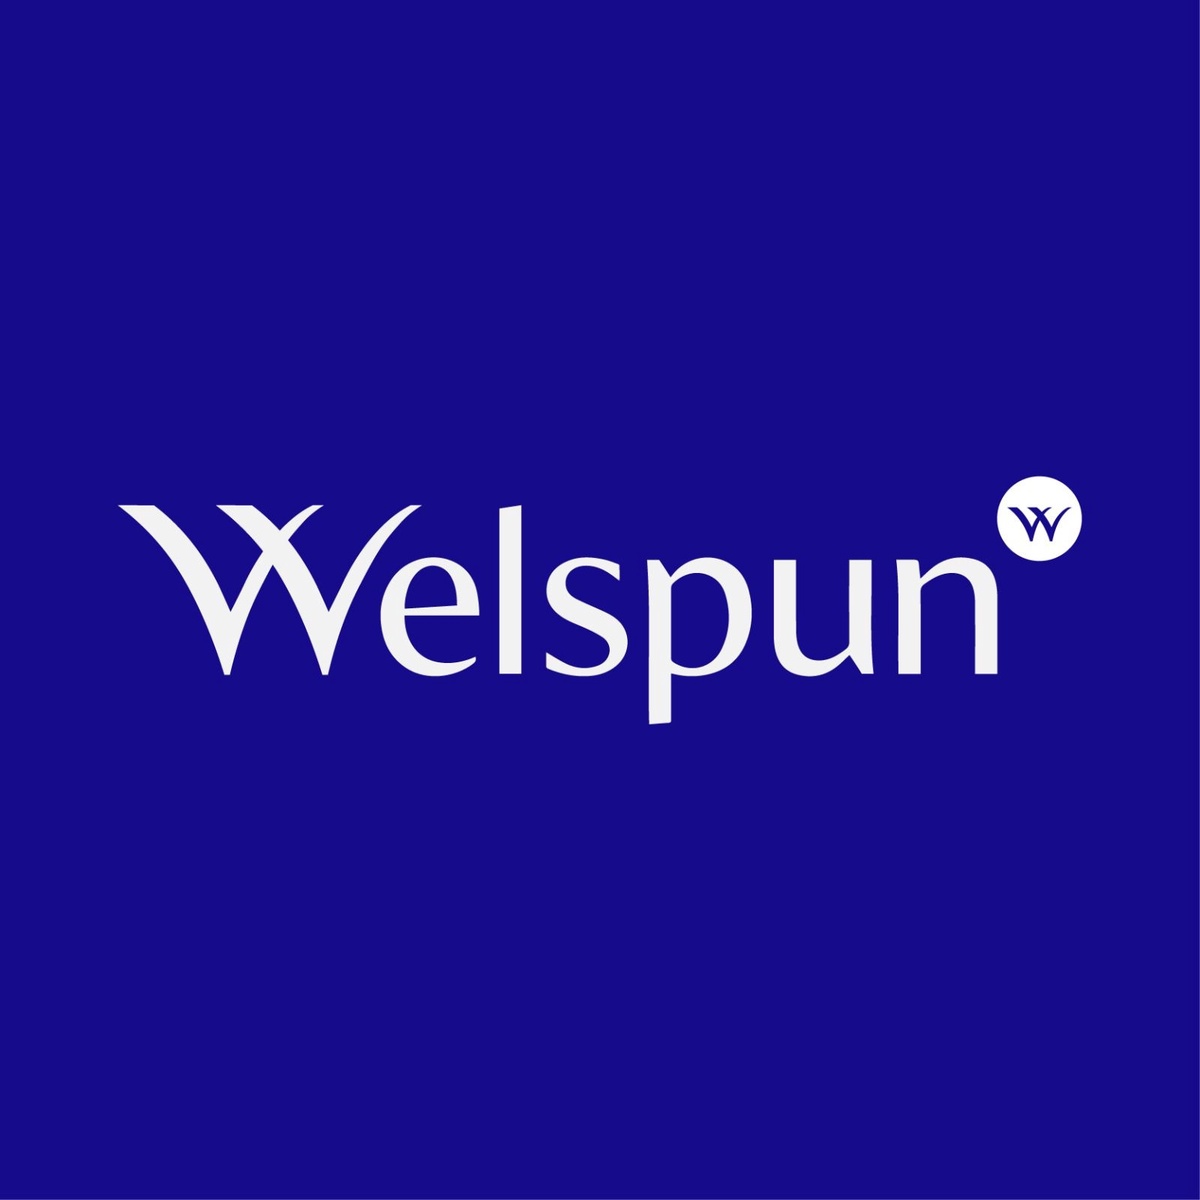 Private Equity Meets Warehousing: The AIF Advantage at Welspun One